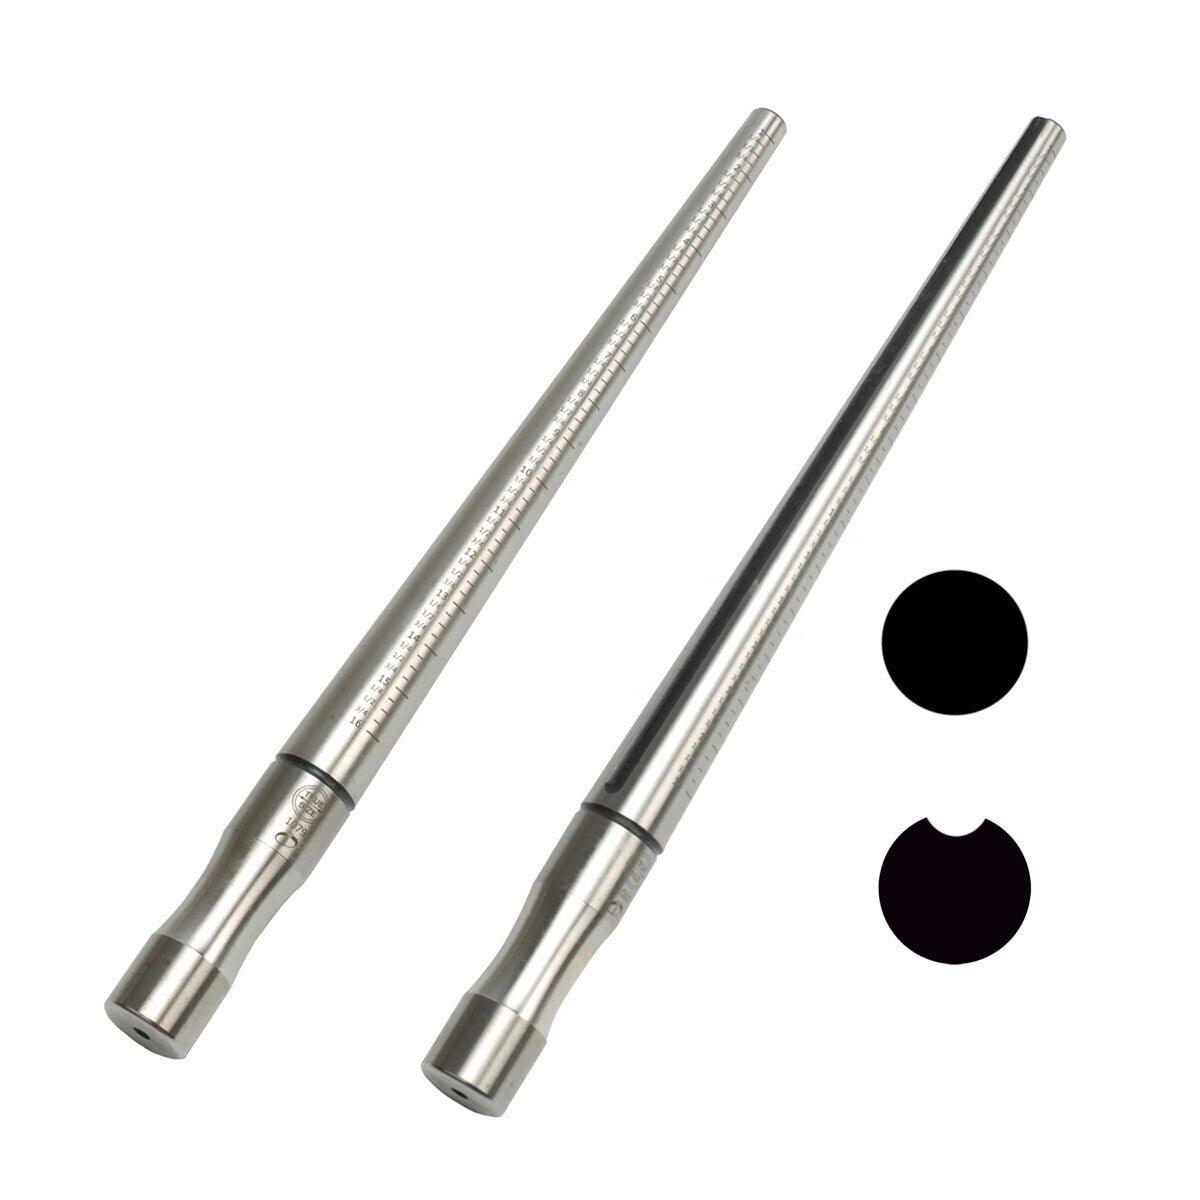 True Size Ring Mandrel with Groove Size 1-16